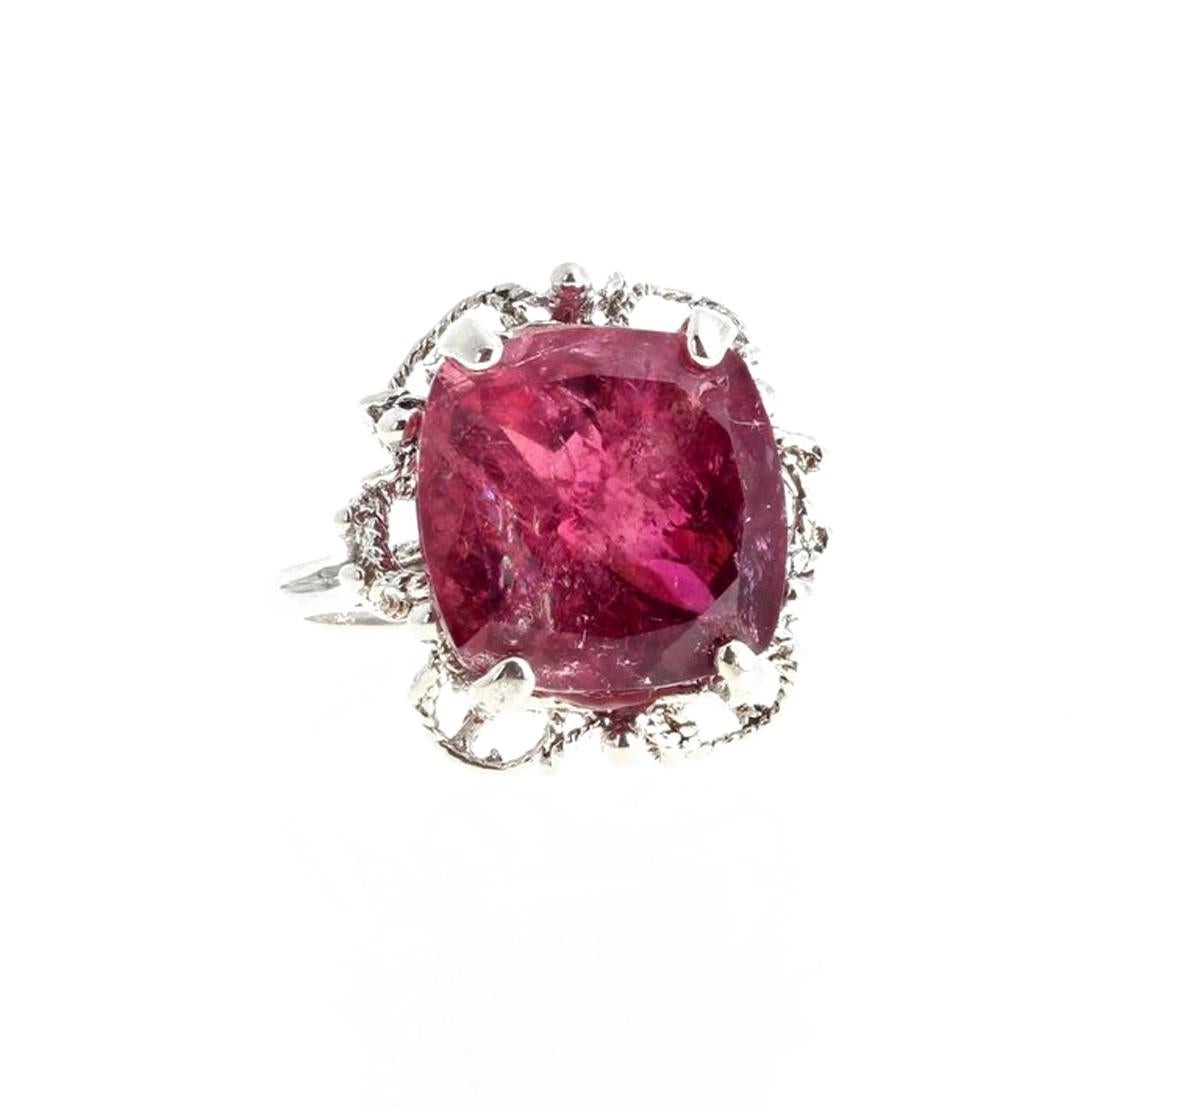 Women's 9.71 Carat Red Tourmaline Sterling Silver Ring